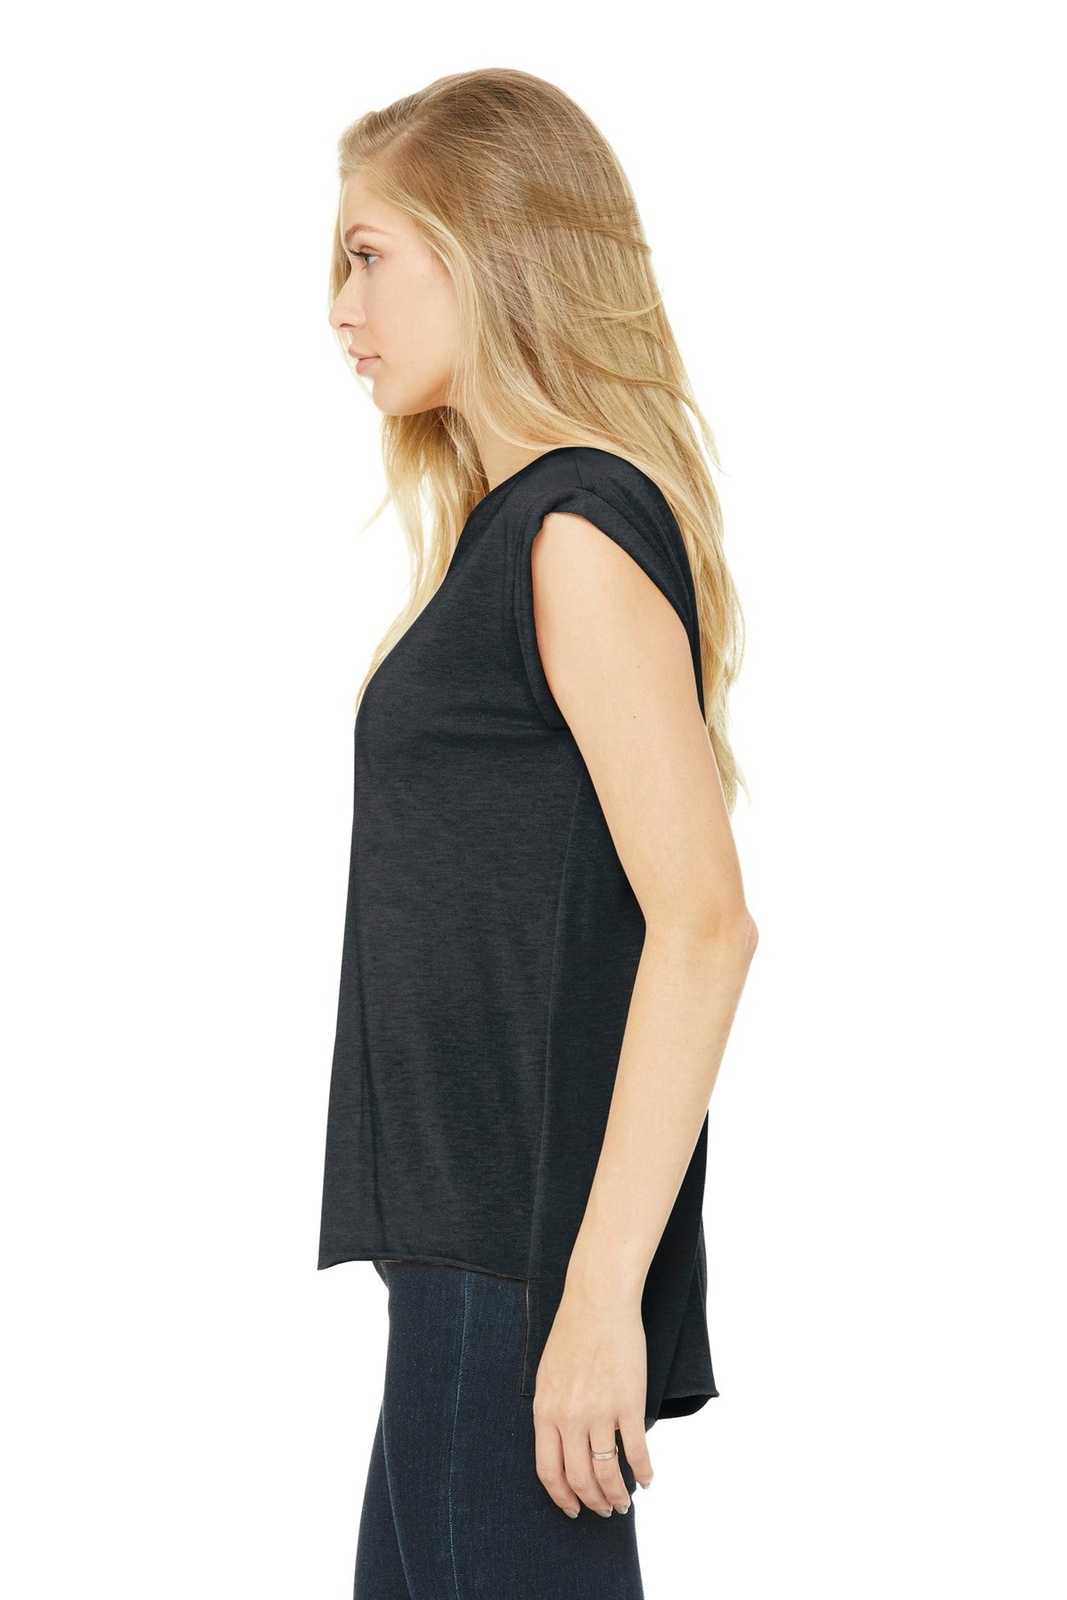 Bella + Canvas 8804 Women&#39;s Flowy Muscle Tee with Rolled Cuffs - Dark Gray Heather - HIT a Double